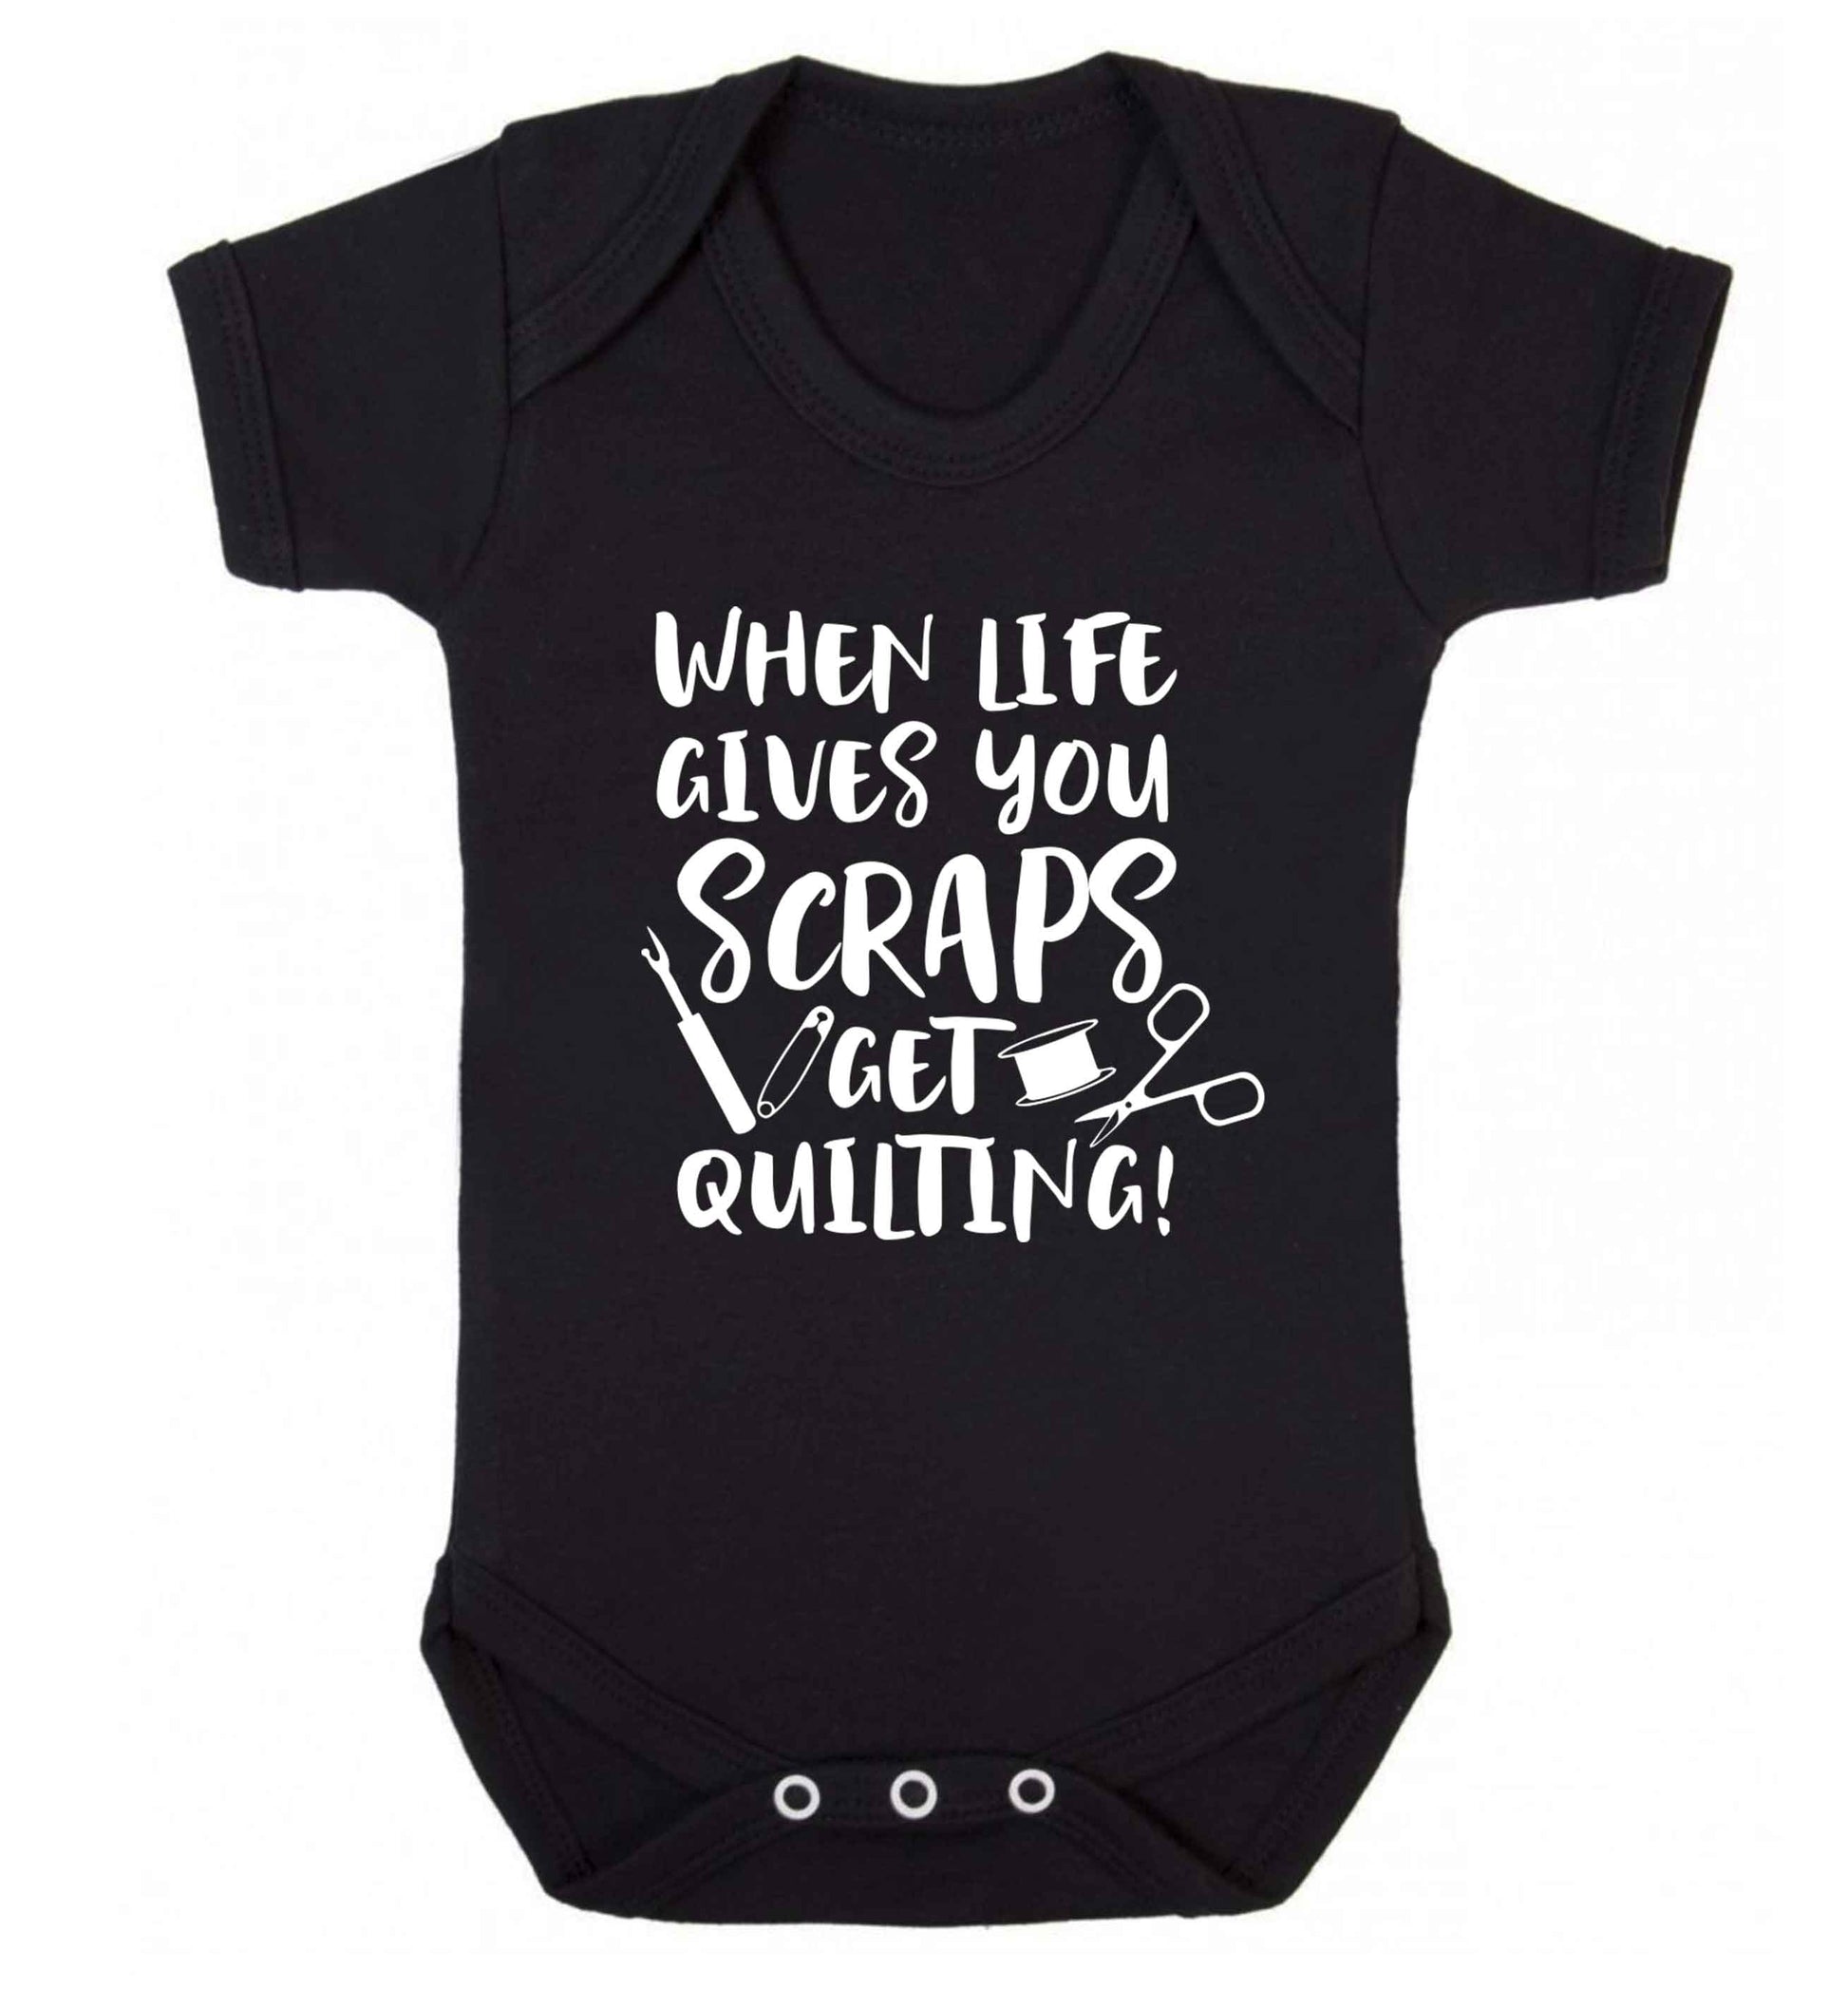 When life gives you scraps get quilting! Baby Vest black 18-24 months